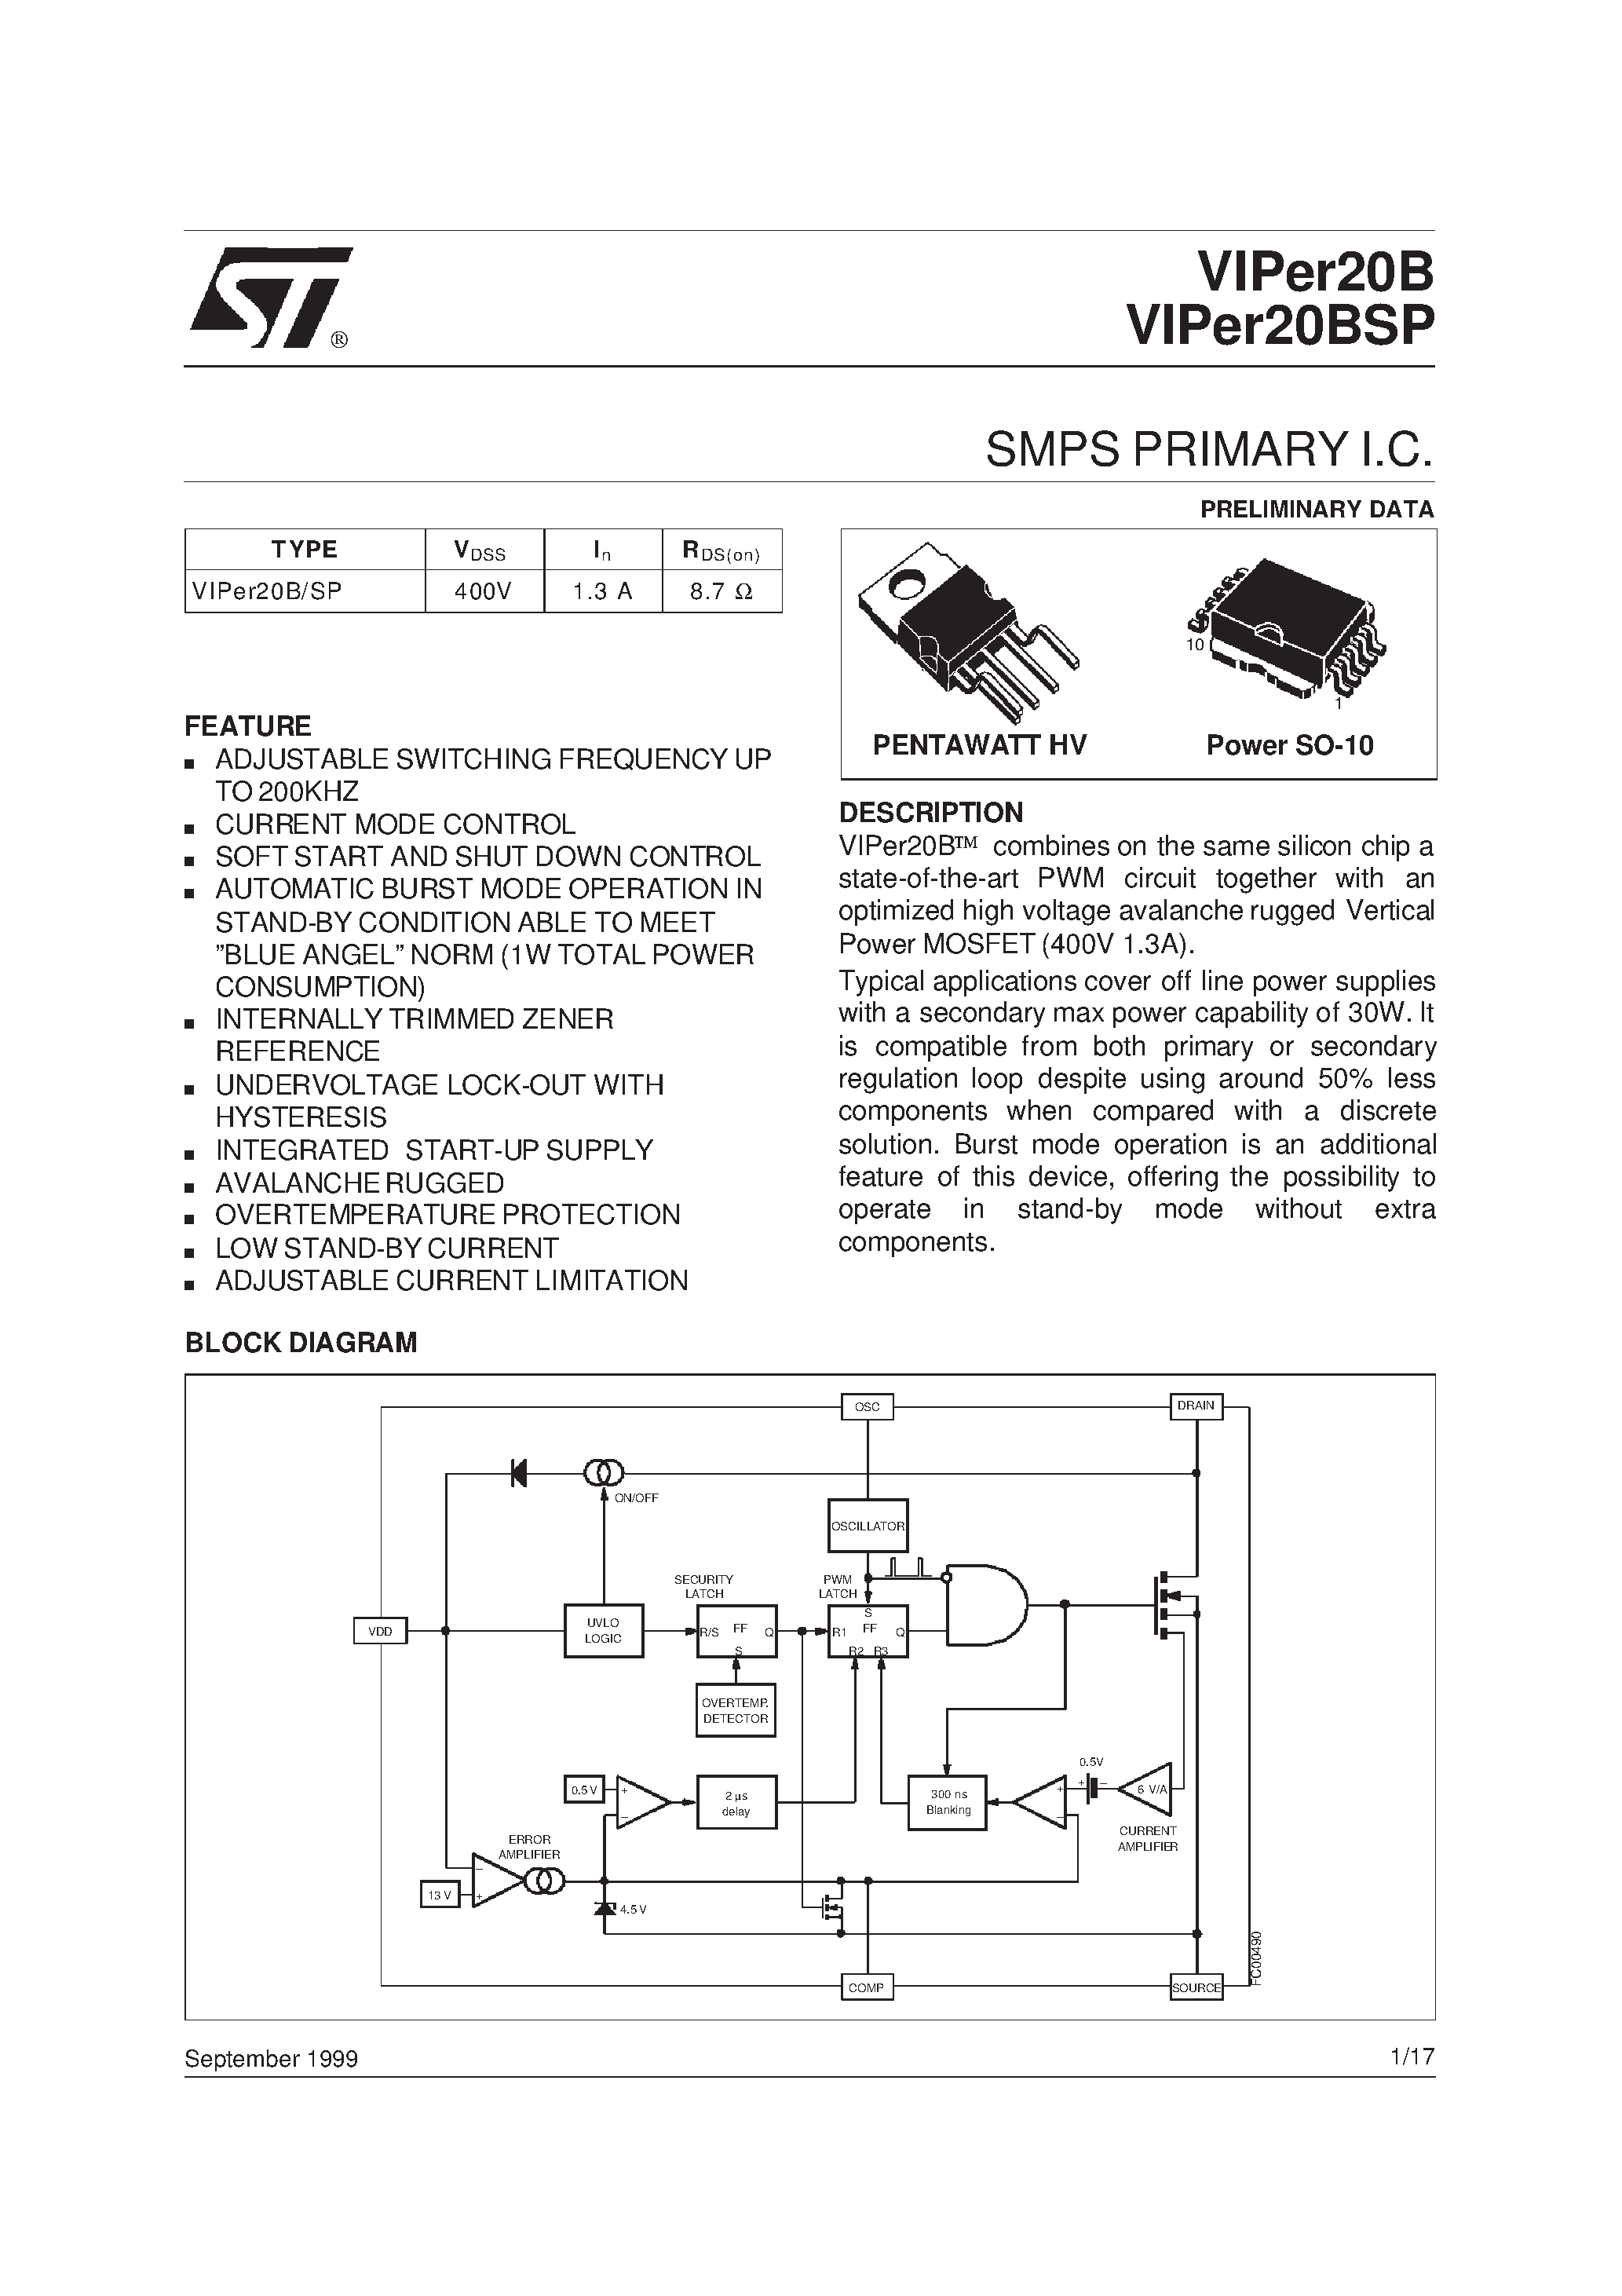 Datasheet VIPer20BSP - SMPS PRIMARY I.C. page 1